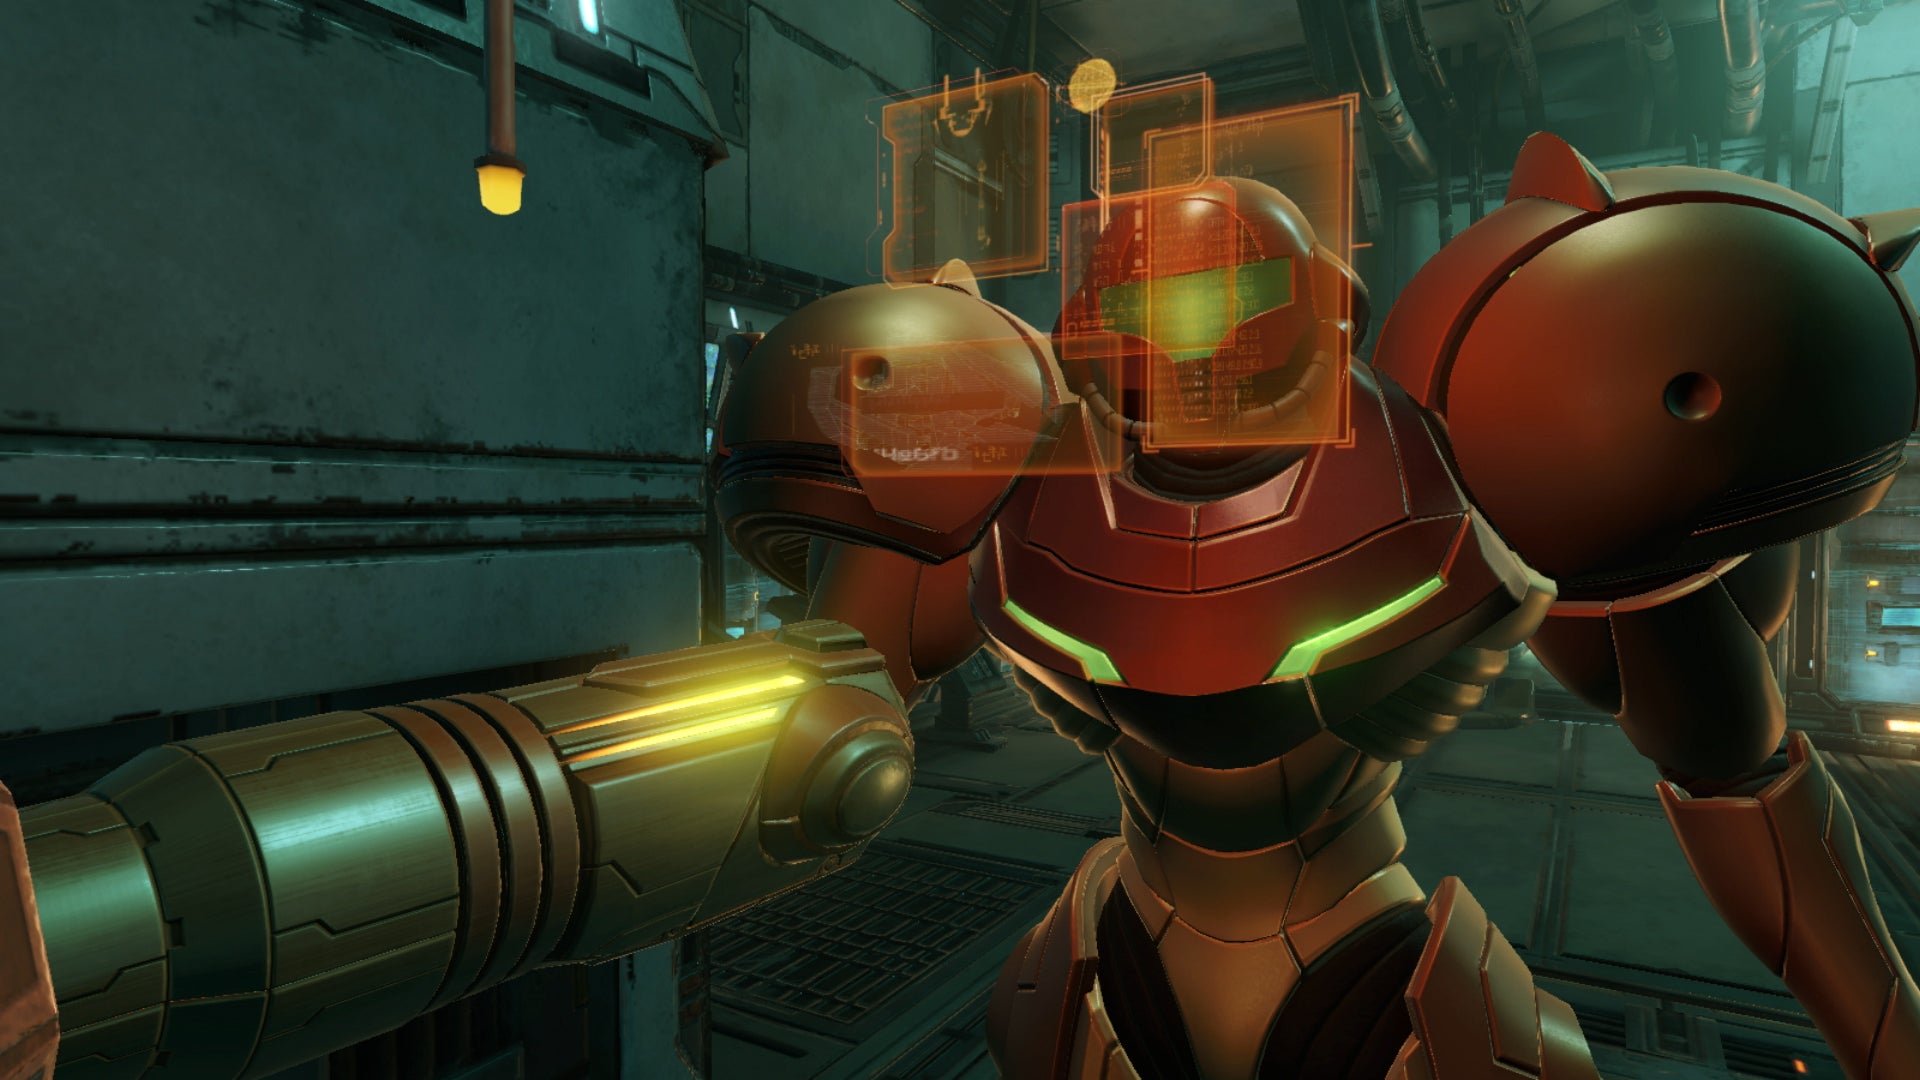 Image for Original Metroid Prime developers omitted from Remastered credits